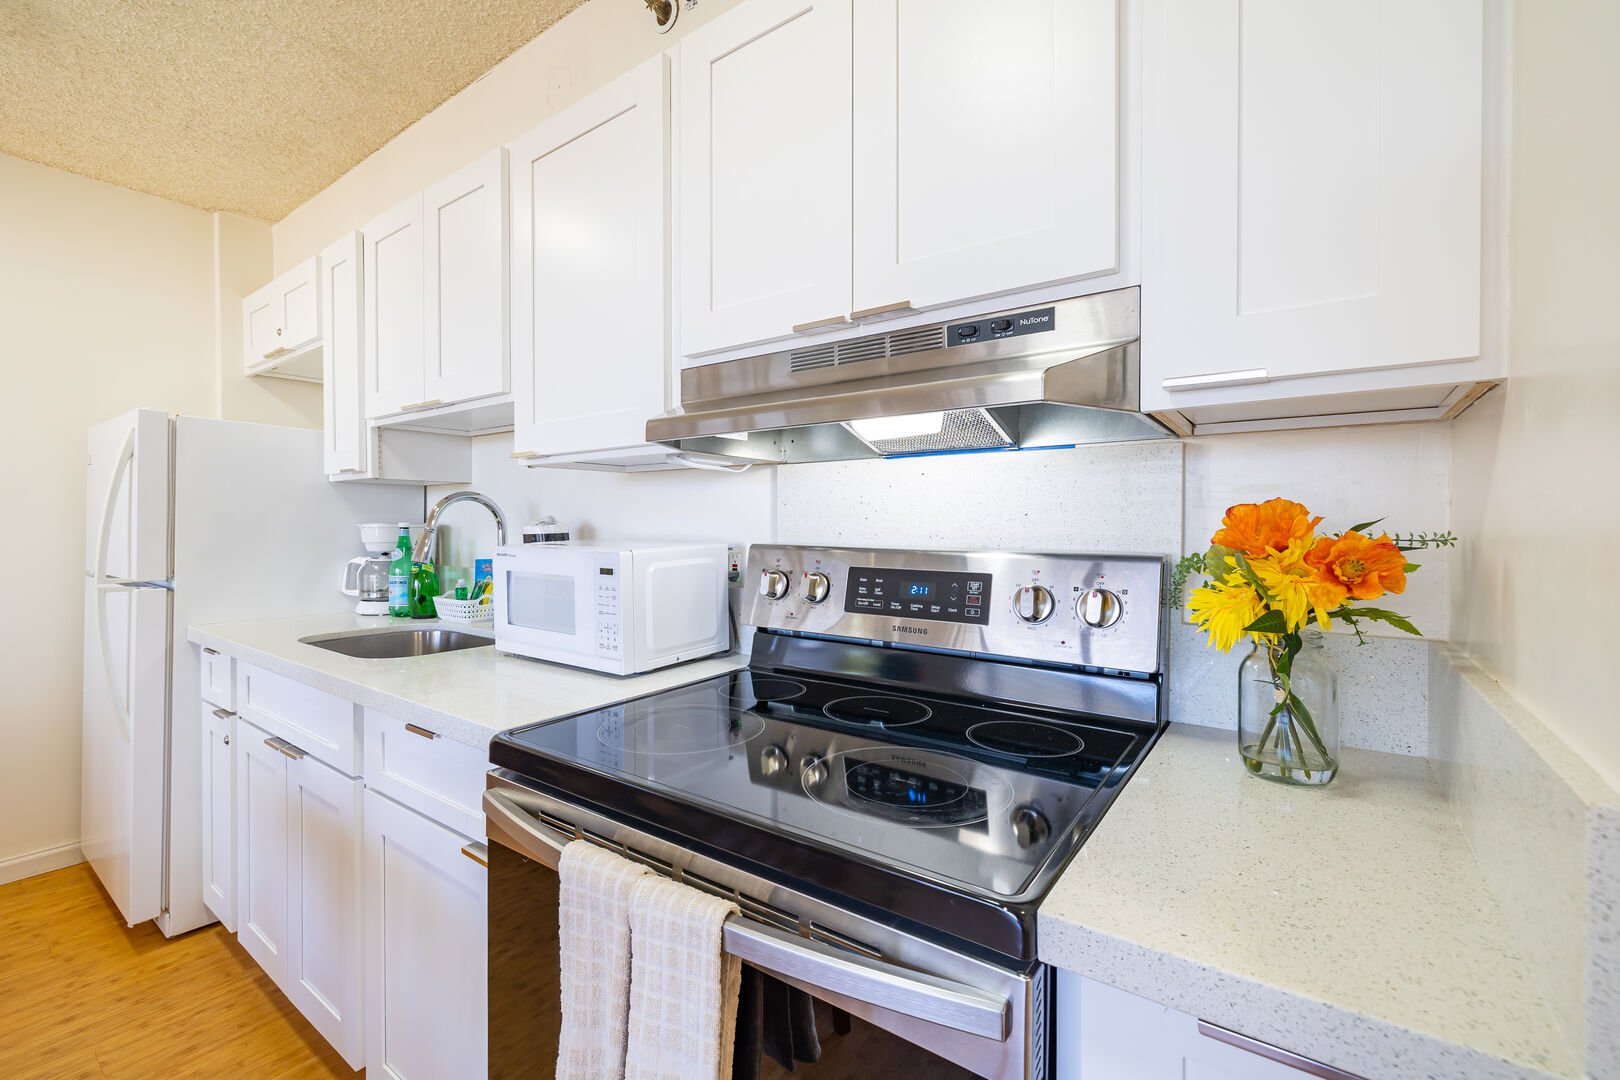 Fully equipped kitchen perfect for your culinary needs!